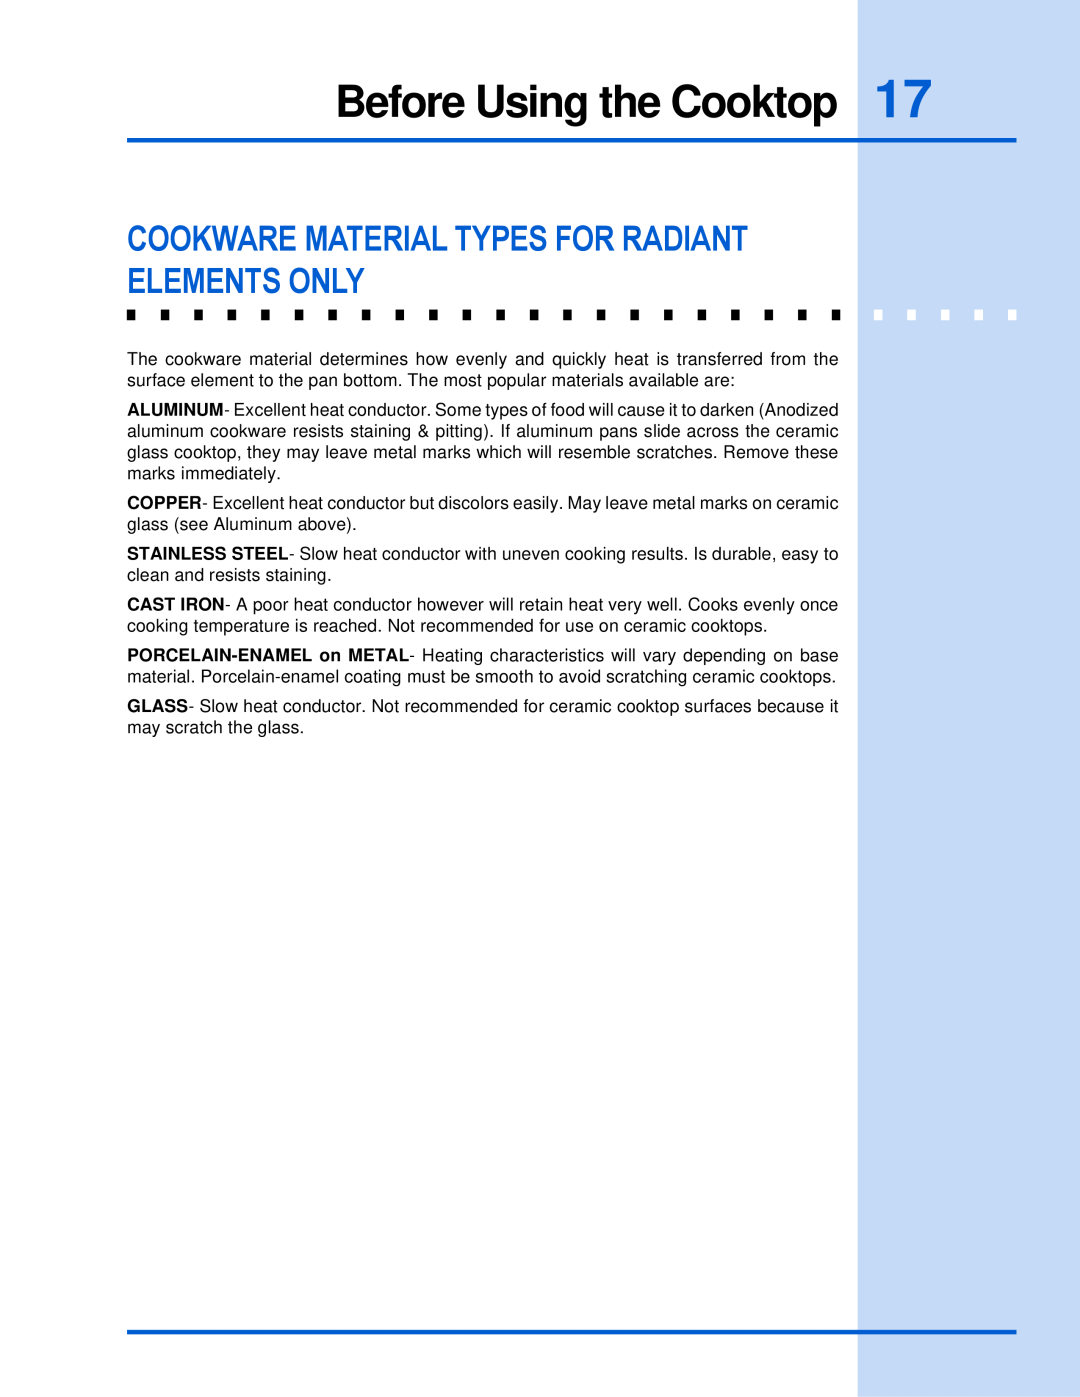 Electrolux 318 203 603 (0709) manual Cookware Material Types For Radiant Elements Only, Before Using the Cooktop 